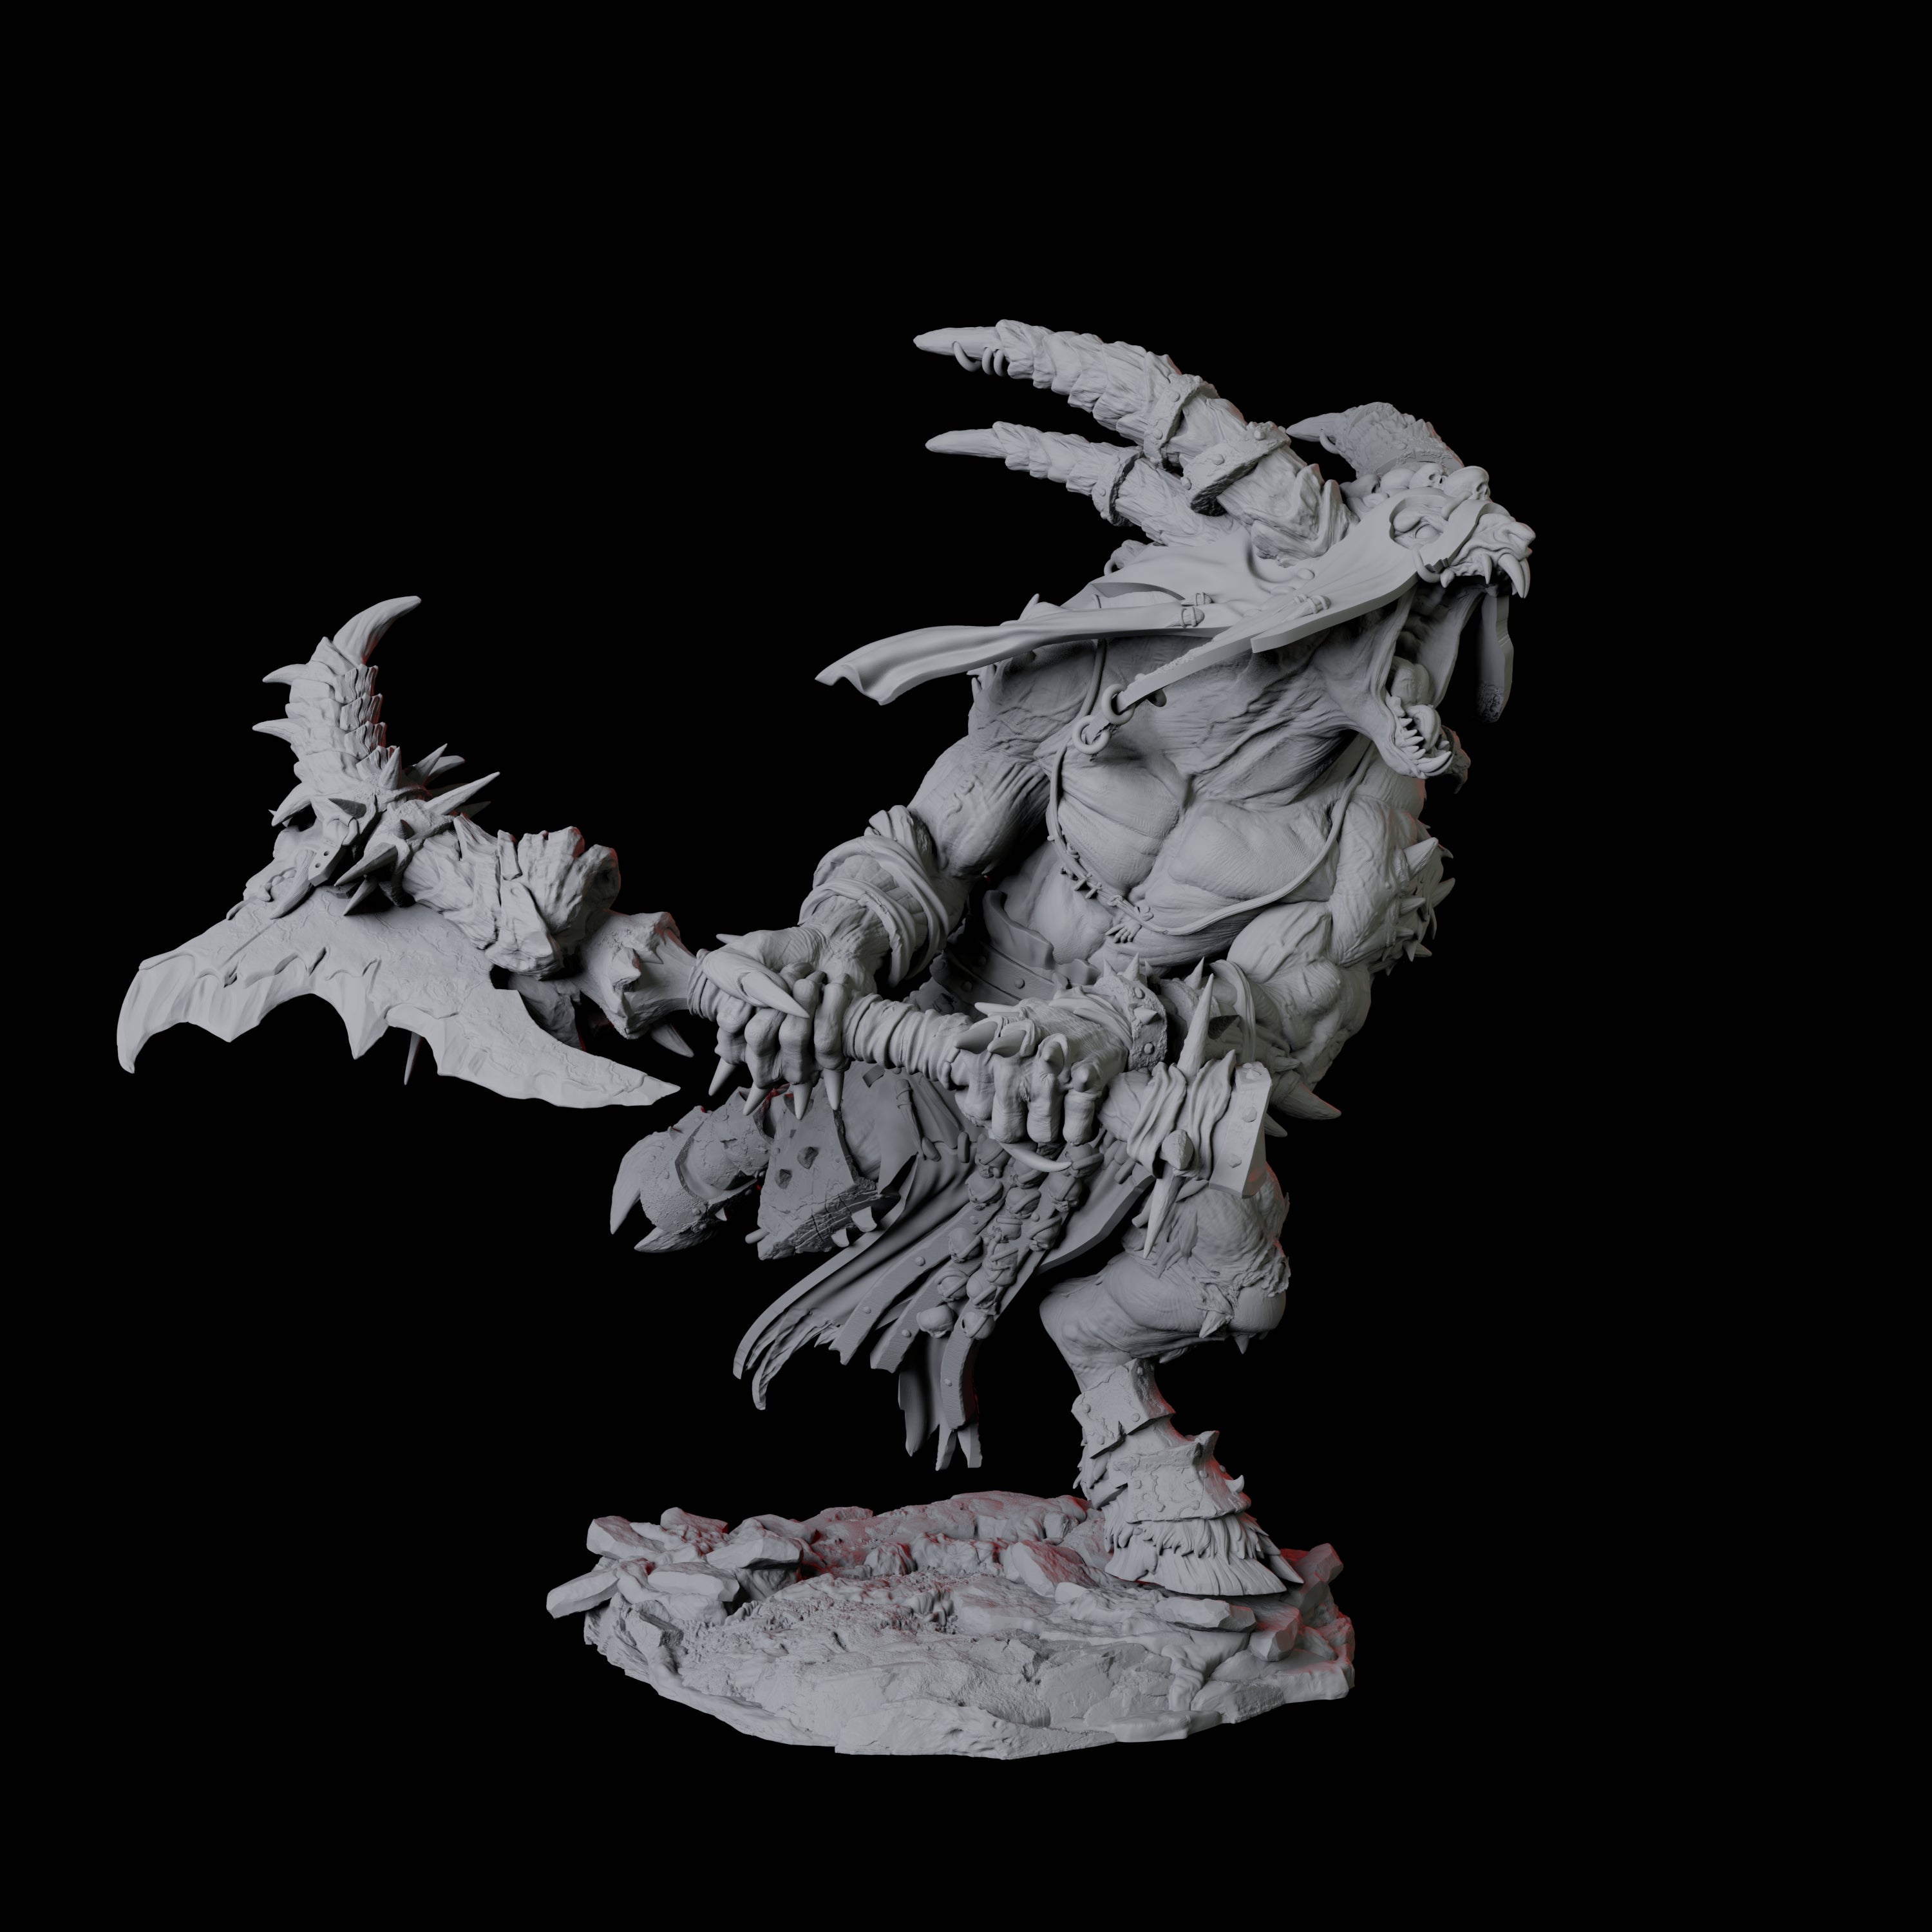 Giant Ratfolk Barbarian A Miniature for Dungeons and Dragons, Pathfinder or other TTRPGs